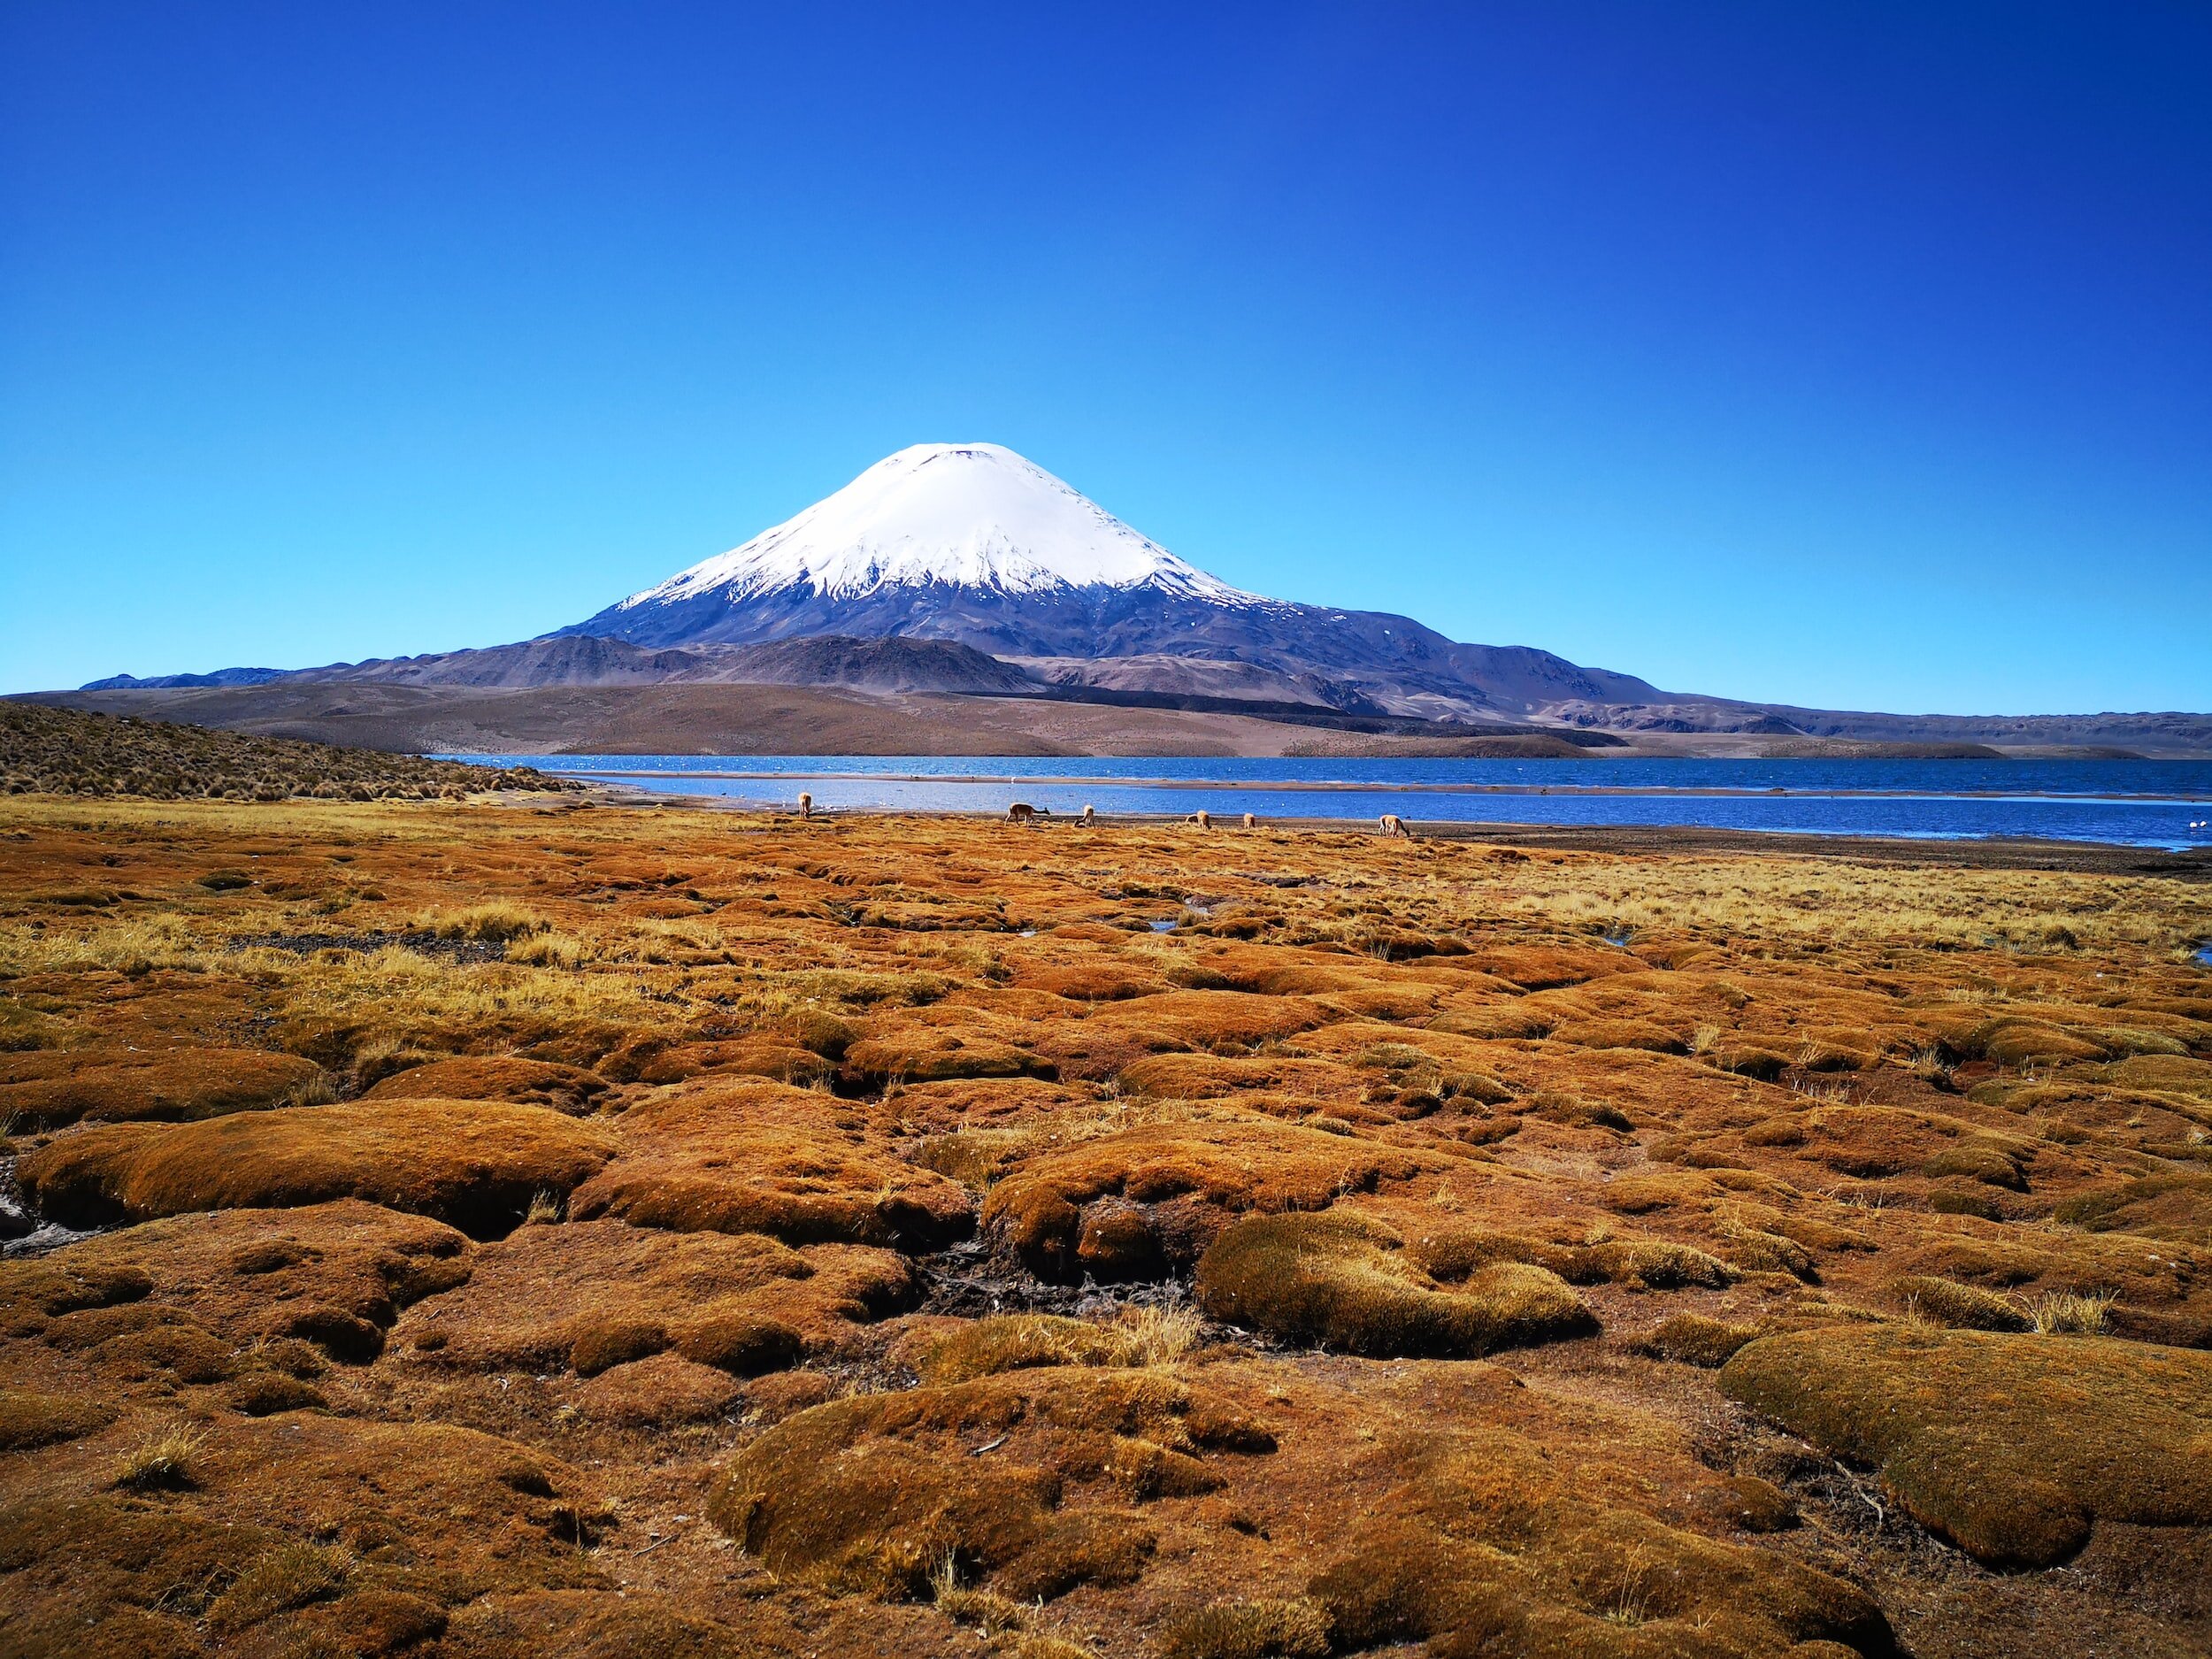 Orange moss stretches up to a lagoon lying in the shadow of the snowcapped Parinacota Volcano inside Lauca National Park